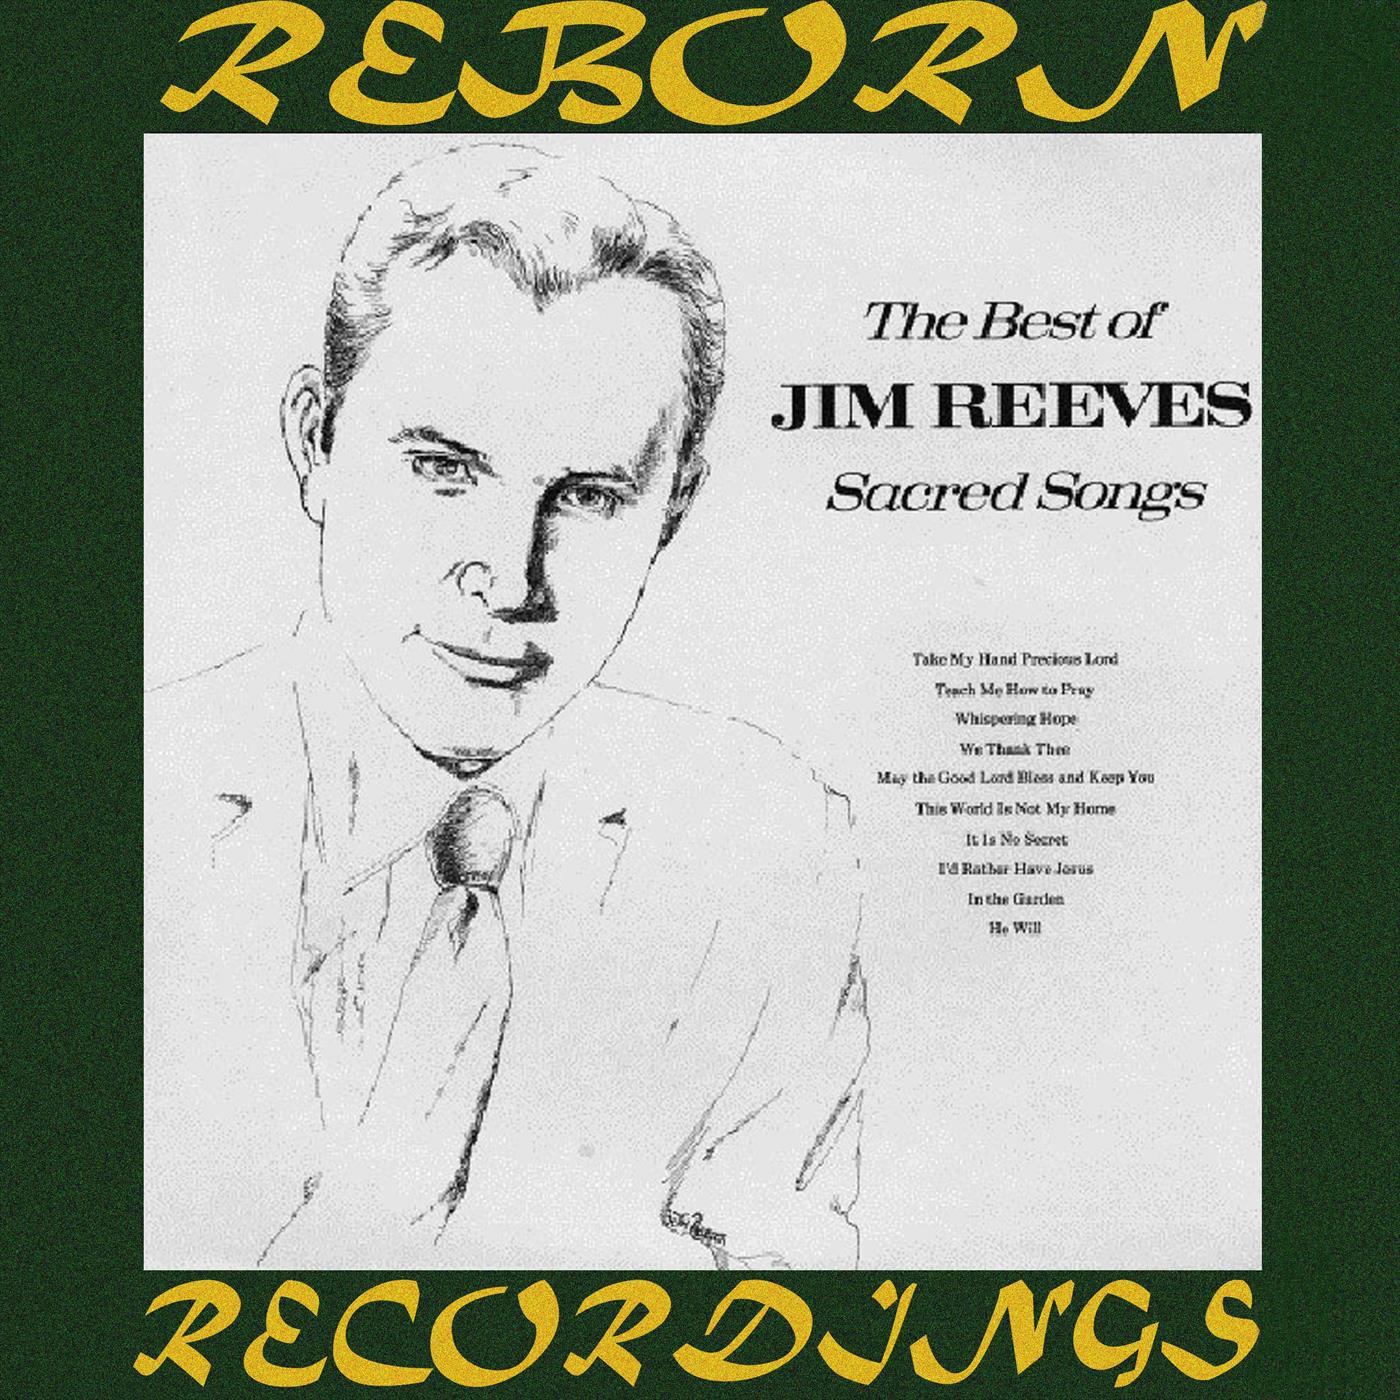 The Best of Jim Reeves Sacred Songs (HD Remastered)